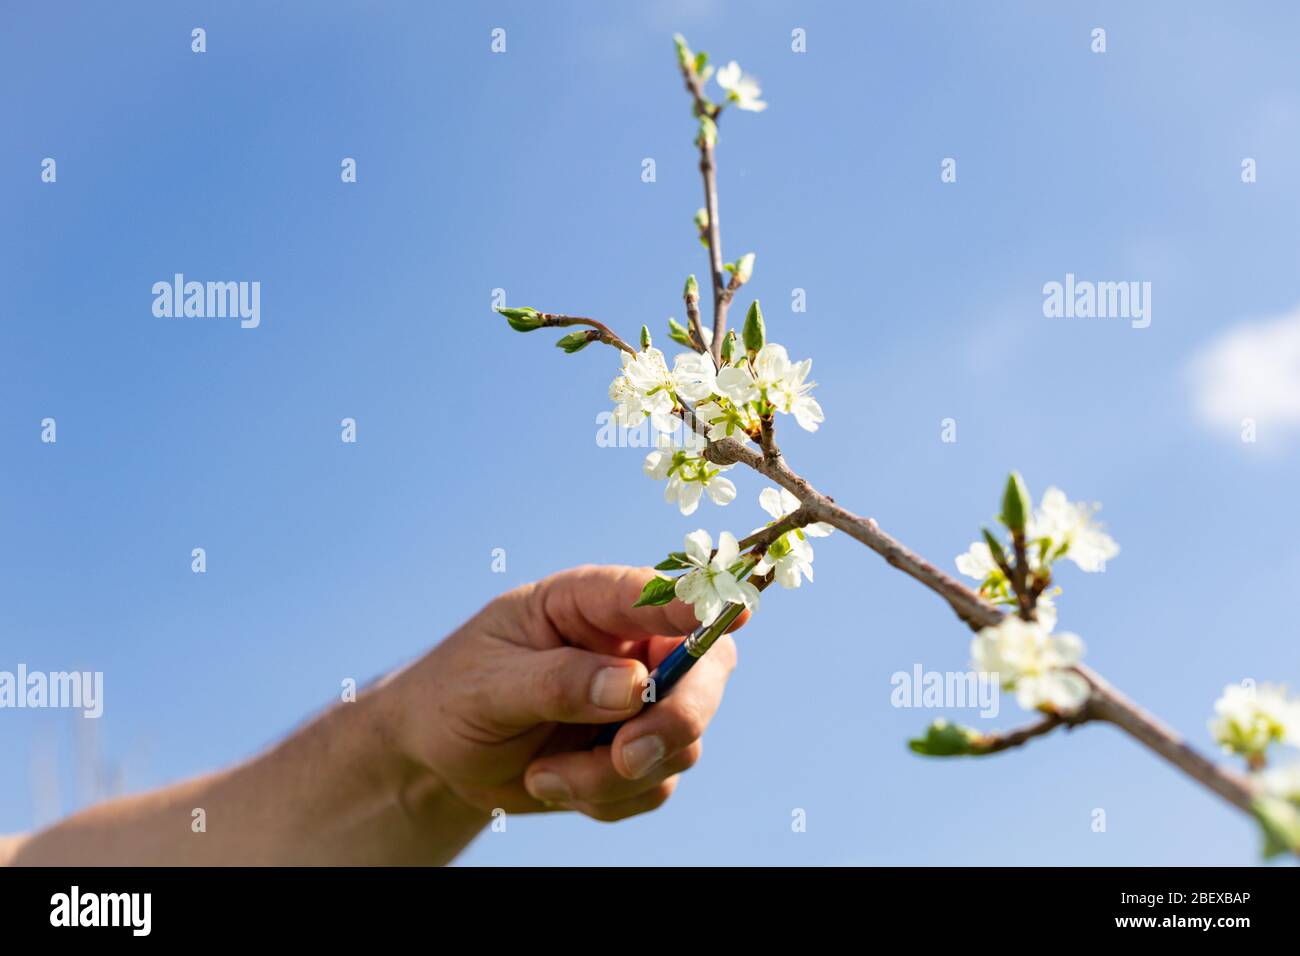 Hand of a gardener artificially pollinates fruit blossoms with an artist's brush before a blue spring sky Stock Photo